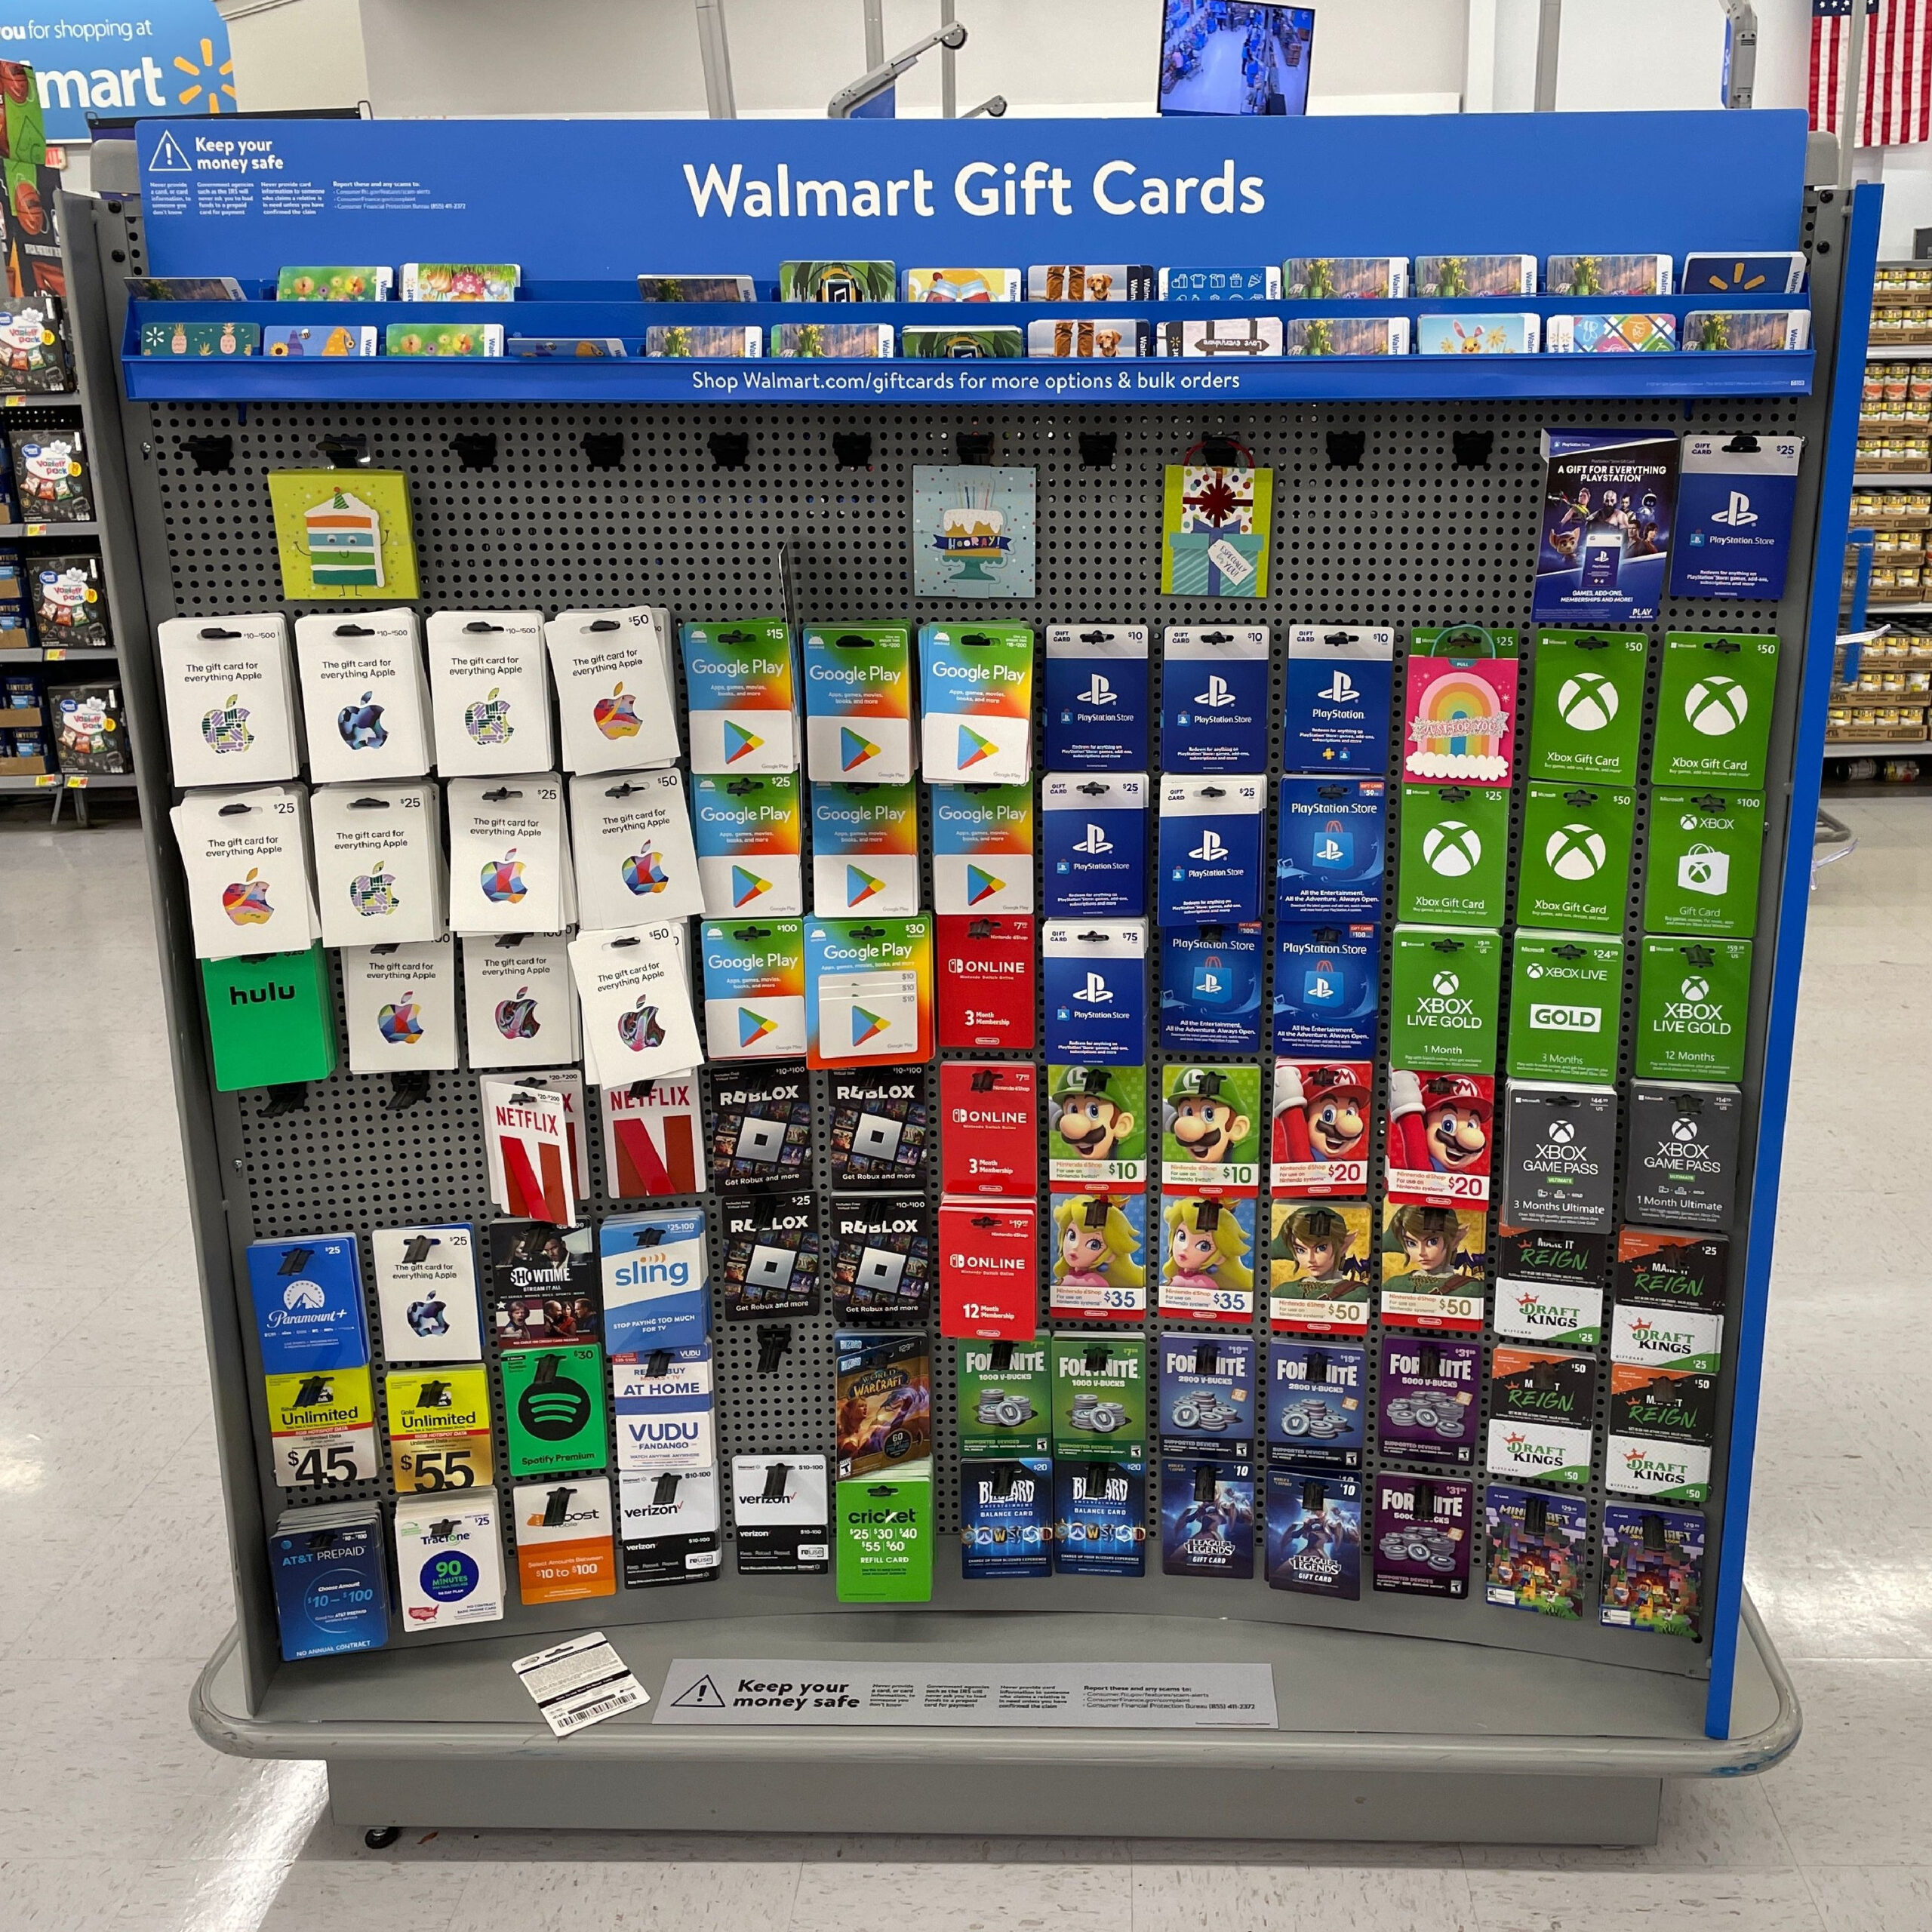 walmart-must-pay-customers-4m-after-gift-card-scheme-find-out-how-to